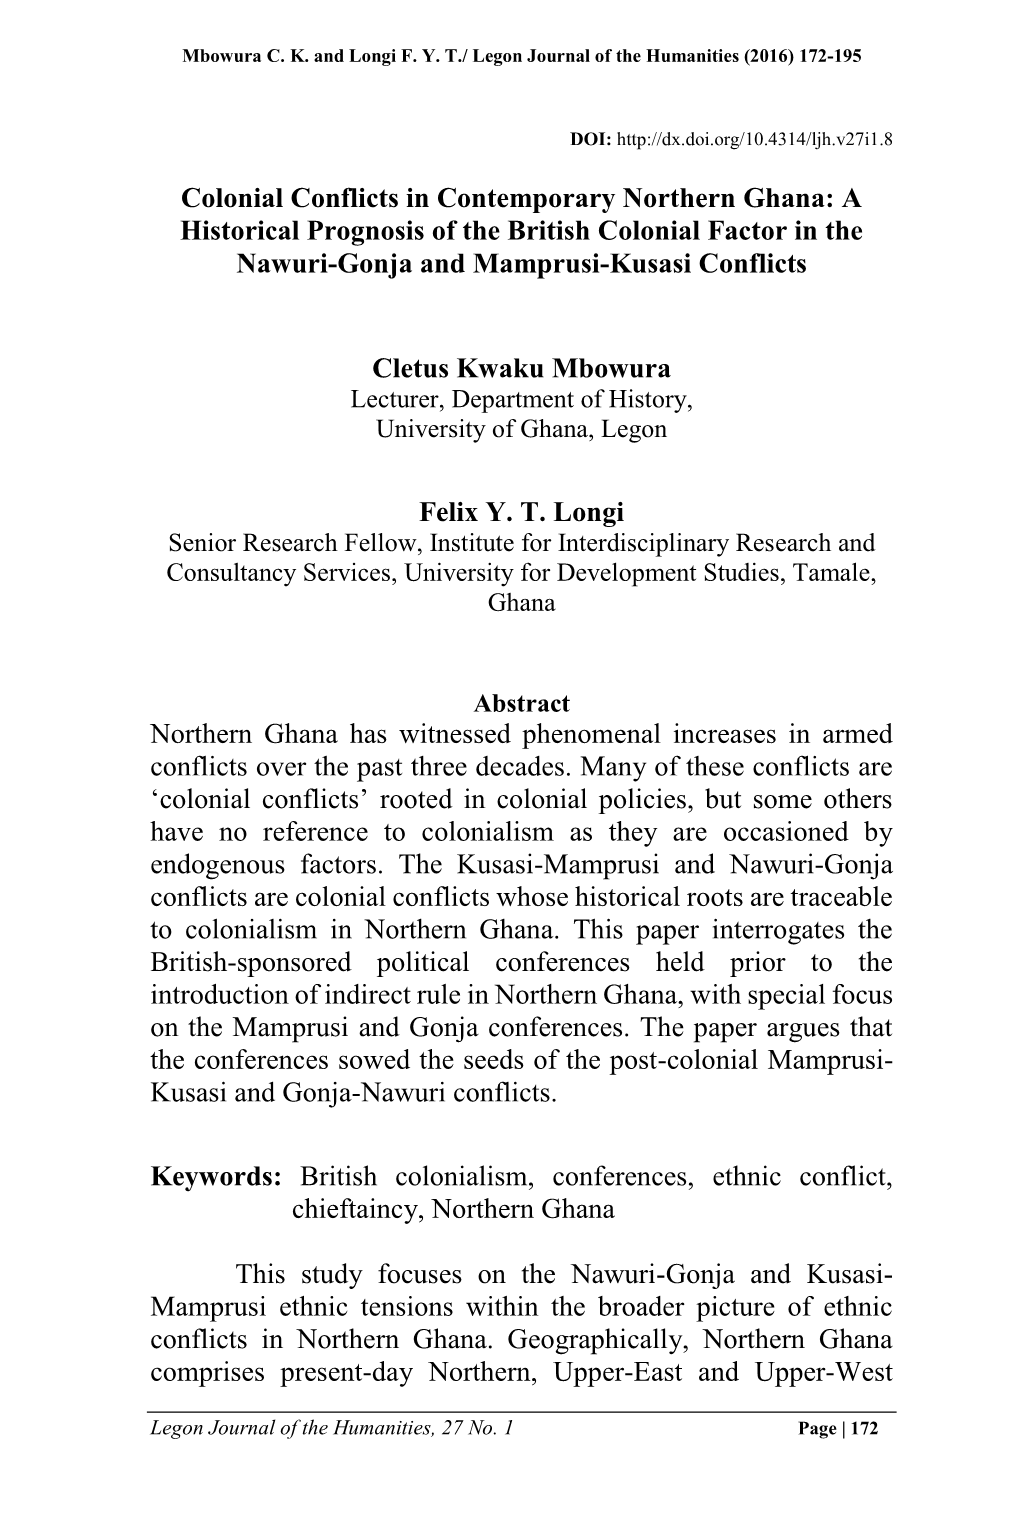 Colonial Conflicts in Contemporary Northern Ghana: a Historical Prognosis of the British Colonial Factor in the Nawuri-Gonja and Mamprusi-Kusasi Conflicts